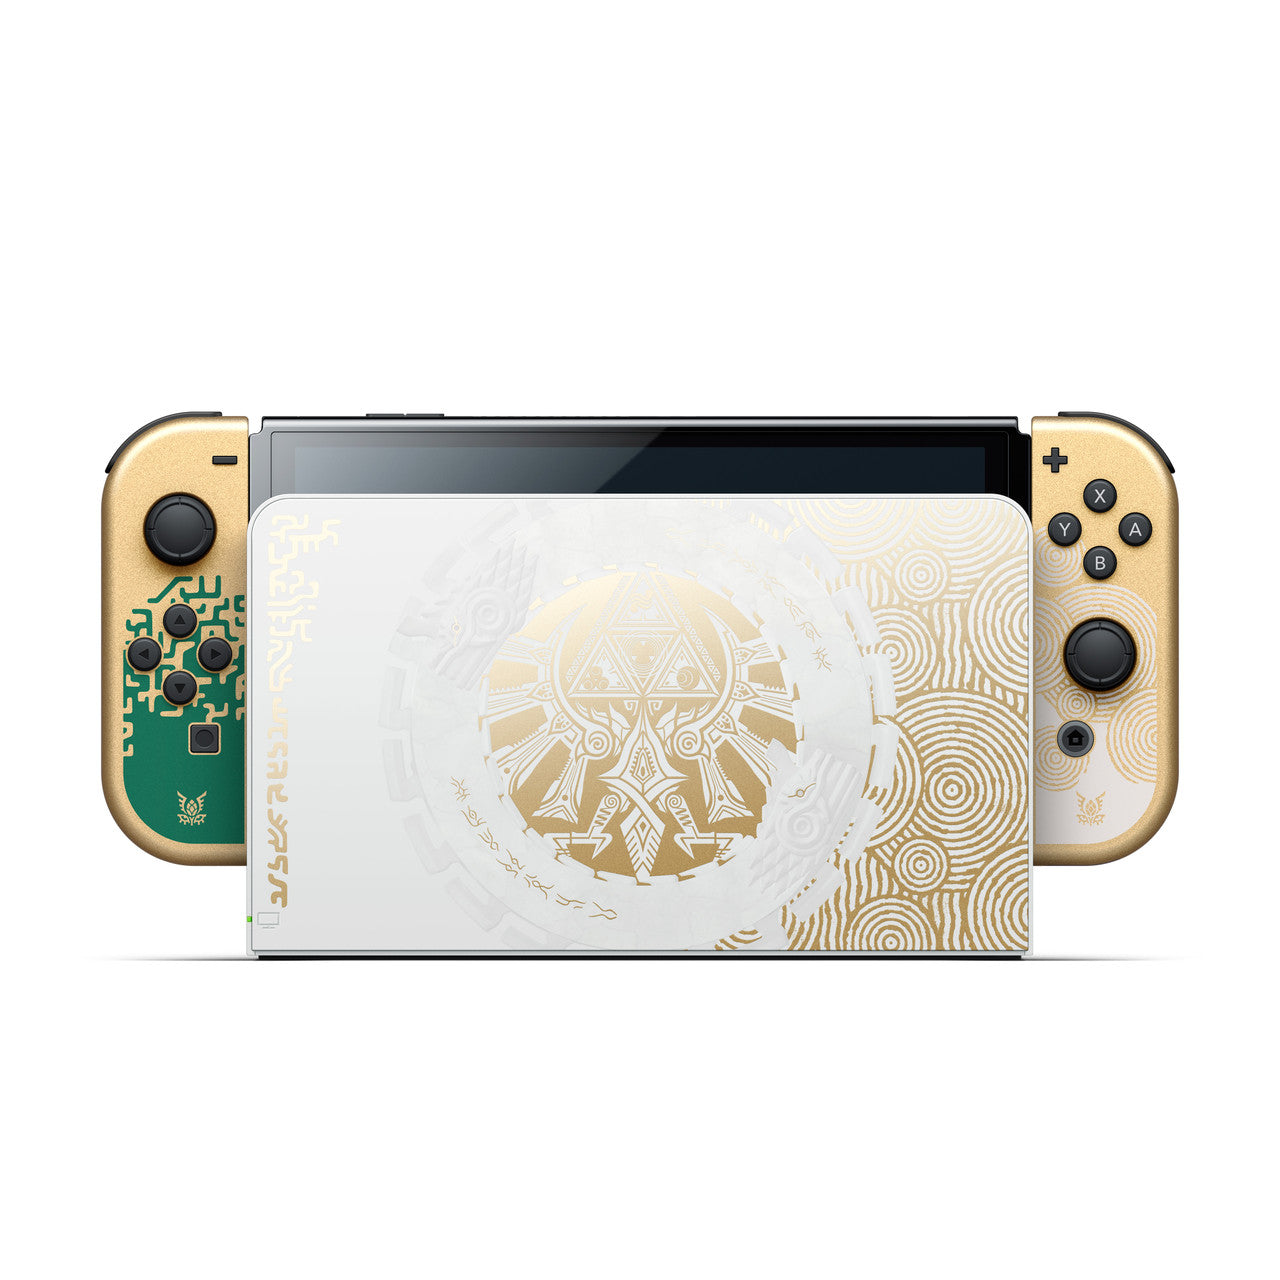 This is brand new.The Nintendo Switch – OLED Model - The Legend of Zelda: Tears of the Kingdom Edition system features a design inspired by the Legend of Zelda: Tears of the Kingdom game, including the familiar Hylian Crest from the Legend of Zelda series on the front of the dock (game not included).